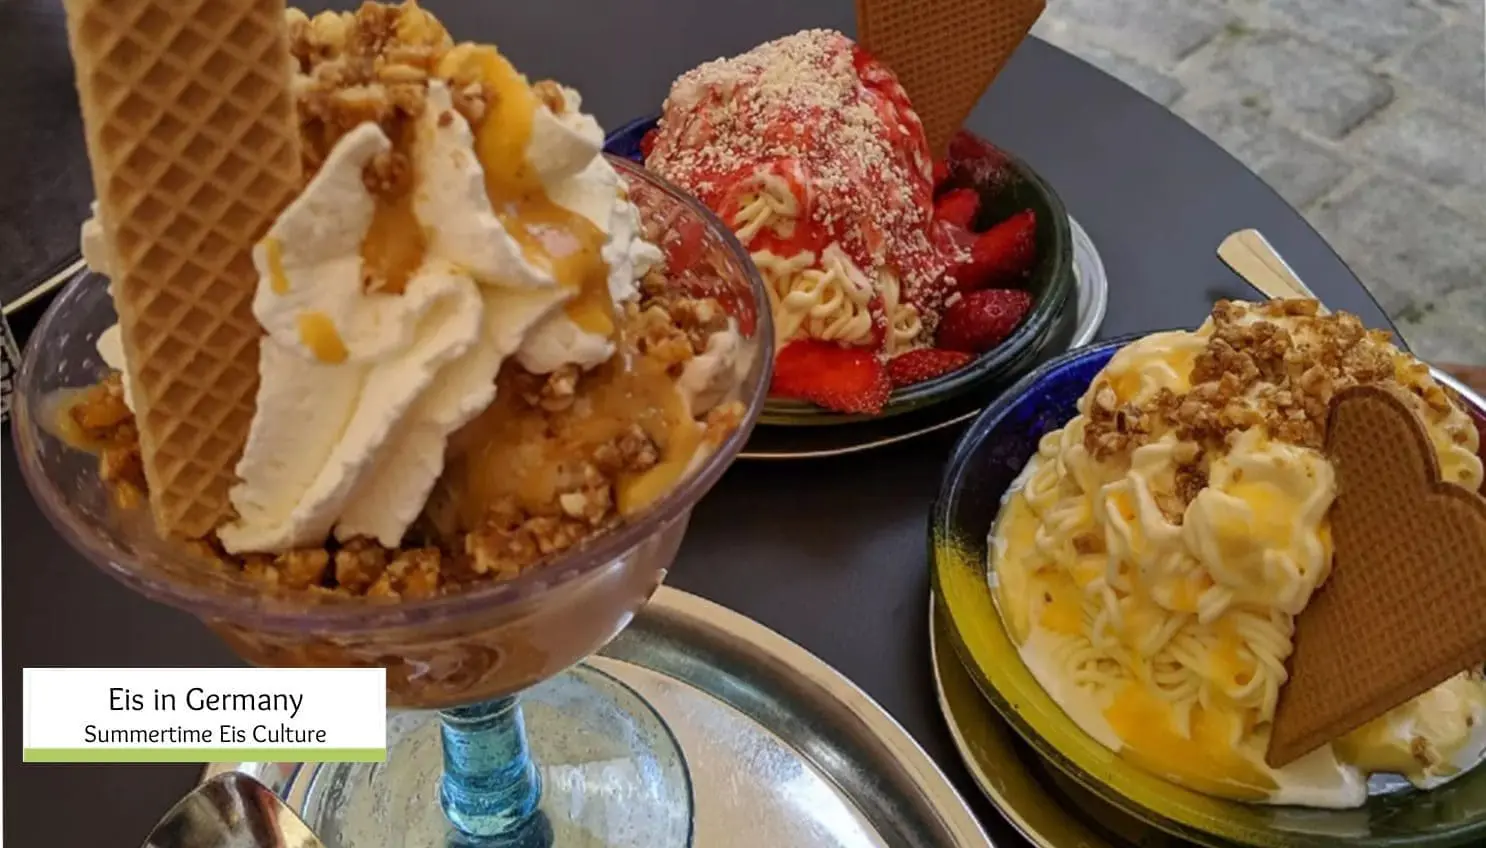 Eis in Germany – The Summertime Eis Culture in Germany